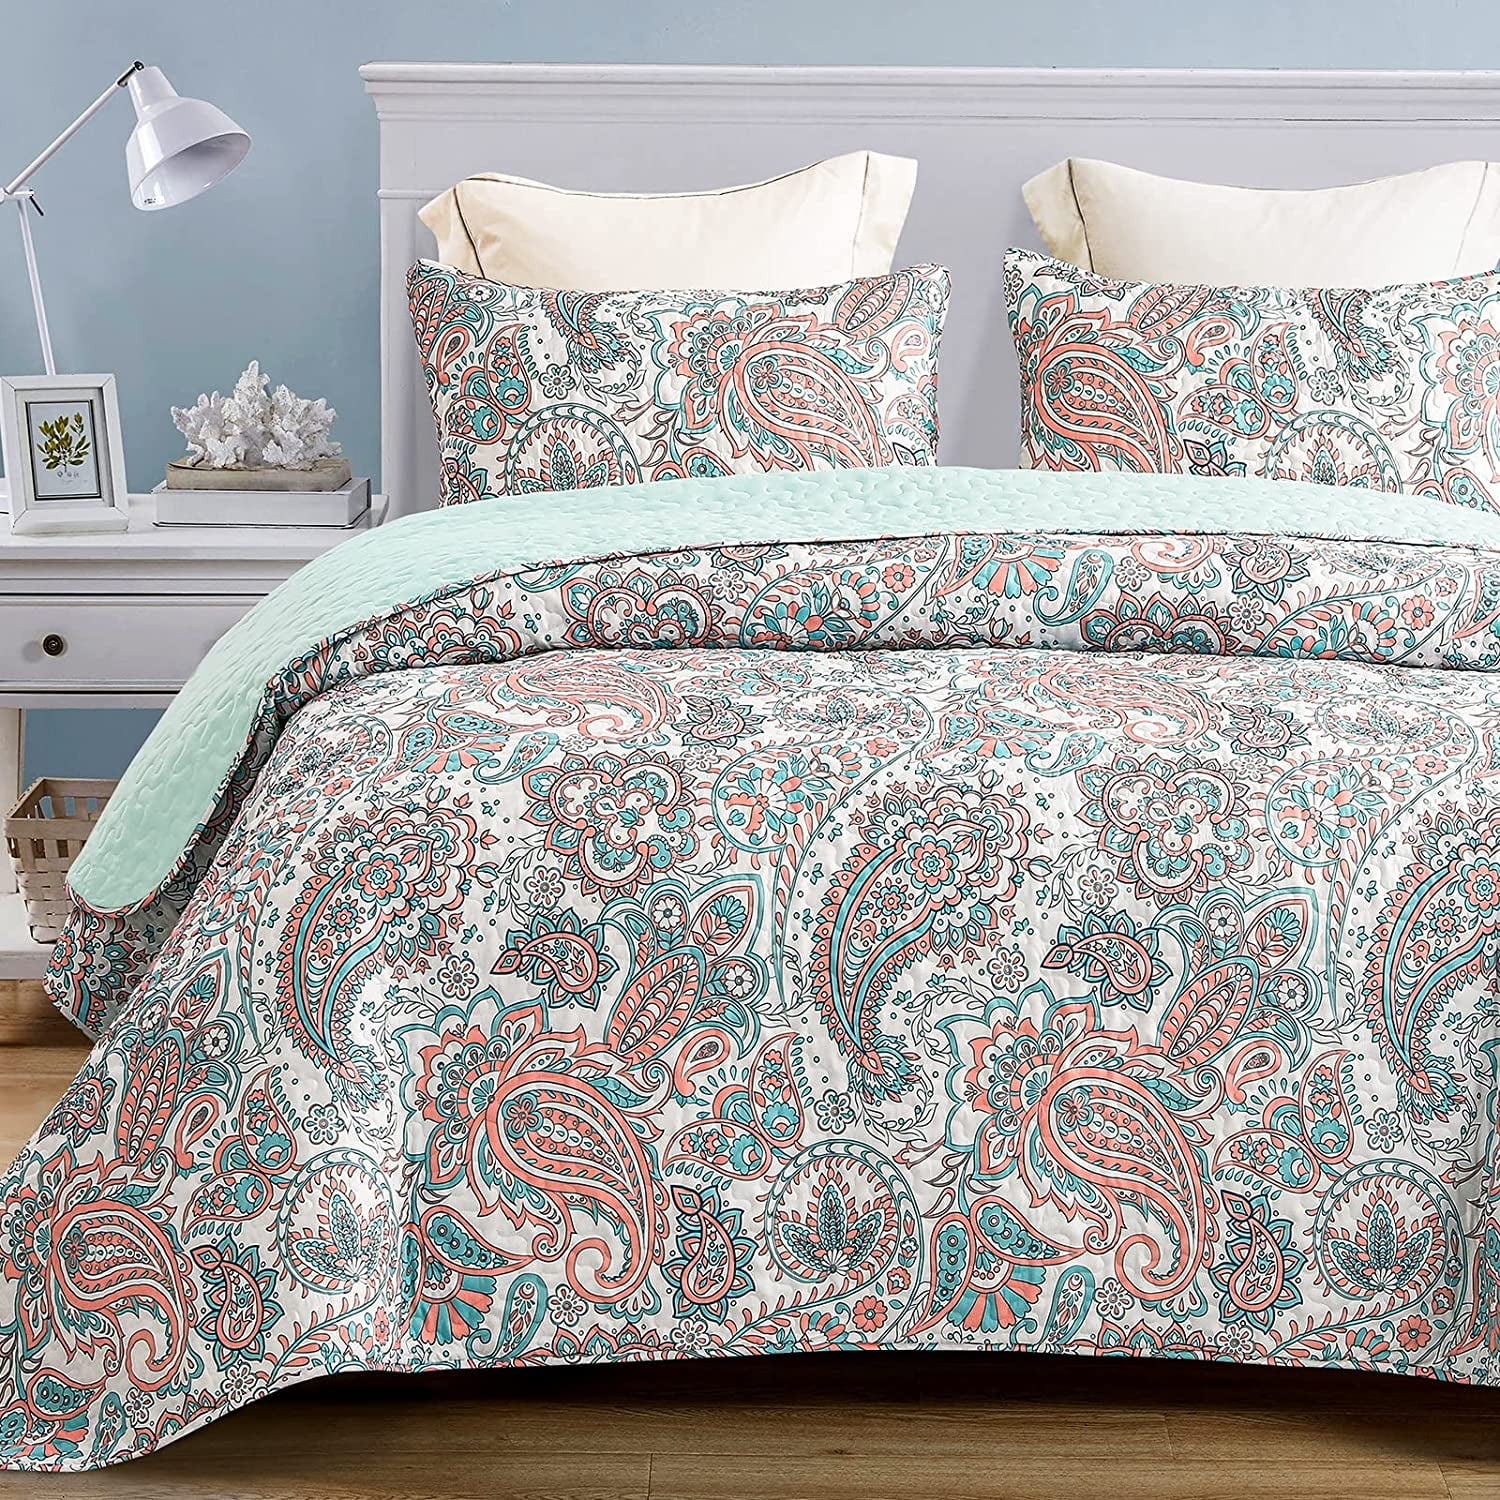 Exclusivo Mezcla Paisley Quilt Set King Size, 3-Piece Reversible Quilt Bedding Set with Decoractive Colorful Boho Pattern (2 Pillow Shams), Lightweight and Soft Bedspread Coverlets